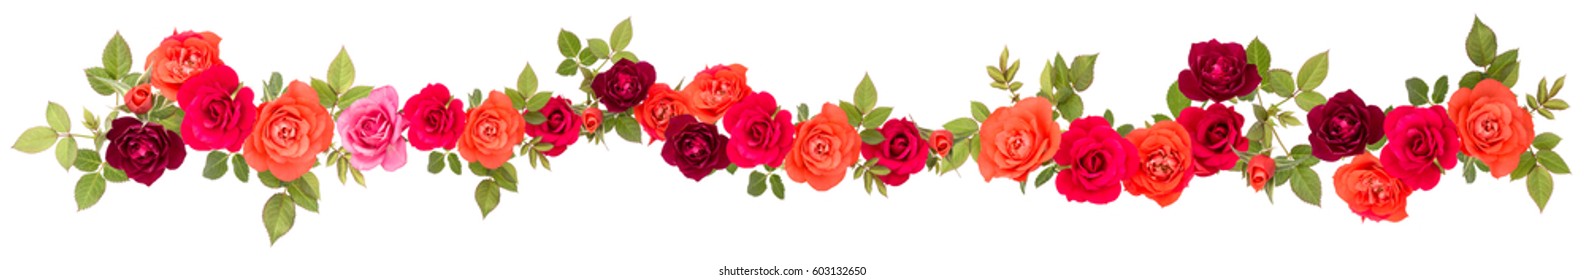 colorful-rose-flower-bouquet-border-260nw-603132650.jpg